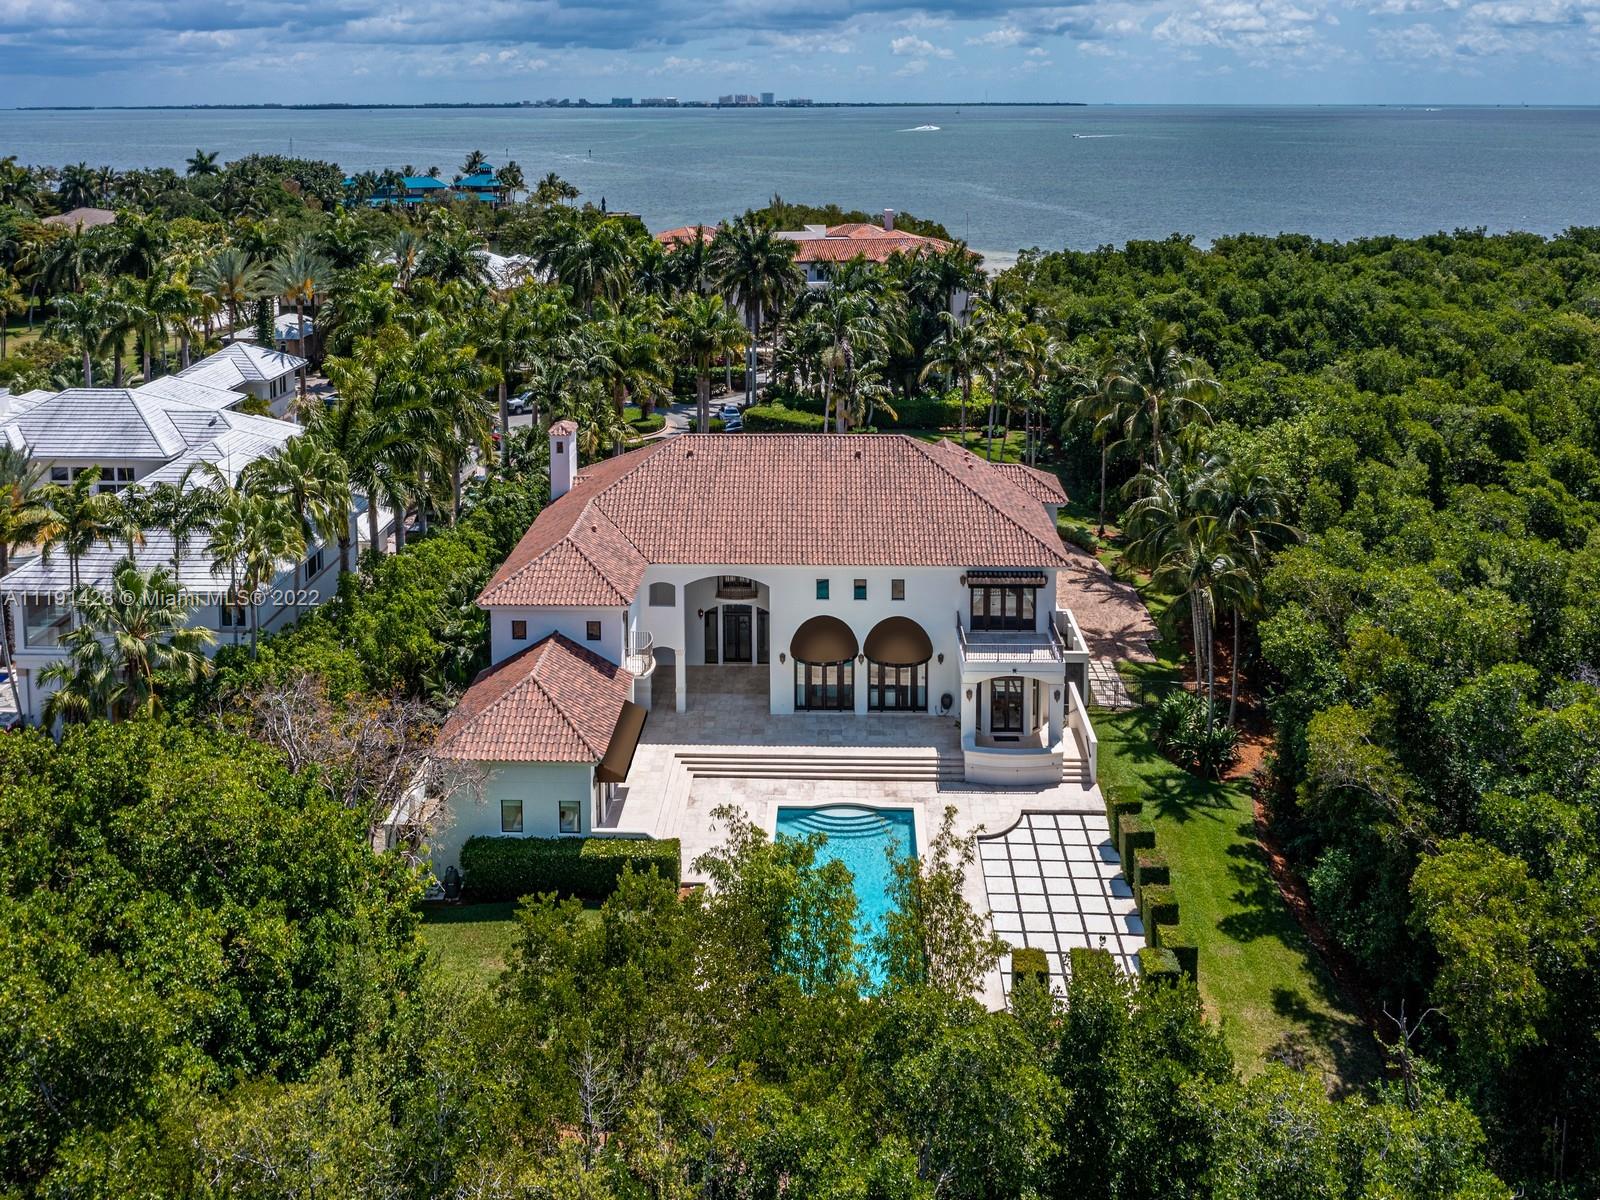 Unique opportunity to own a 1 of a kind estate in one of Miami's most prestigious GATED communities, TAHITI BEACH. This classic Mediterranean home is ideally located on a OVER 1 ACRE LOT at the end of a private cul-de-sac. This home features 10,768SF Total,7 beds,6.5 baths a double-height foyer & family room, oversized master bedroom w/a large balcony+a guest house w/a full guest house. W/a large pool & extensive outside terraces, perfect for entertaining. Large kitchen with a butler’s pantry. Including a large office w/ a full bath and balcony,3 car garage, service room, impact windows throughout & recently updated roof. Don’t miss this incredible opportunity to live in one of 26 homes in this private community, complete w/a private beach, tennis courts & access to all Cocoplum amenities